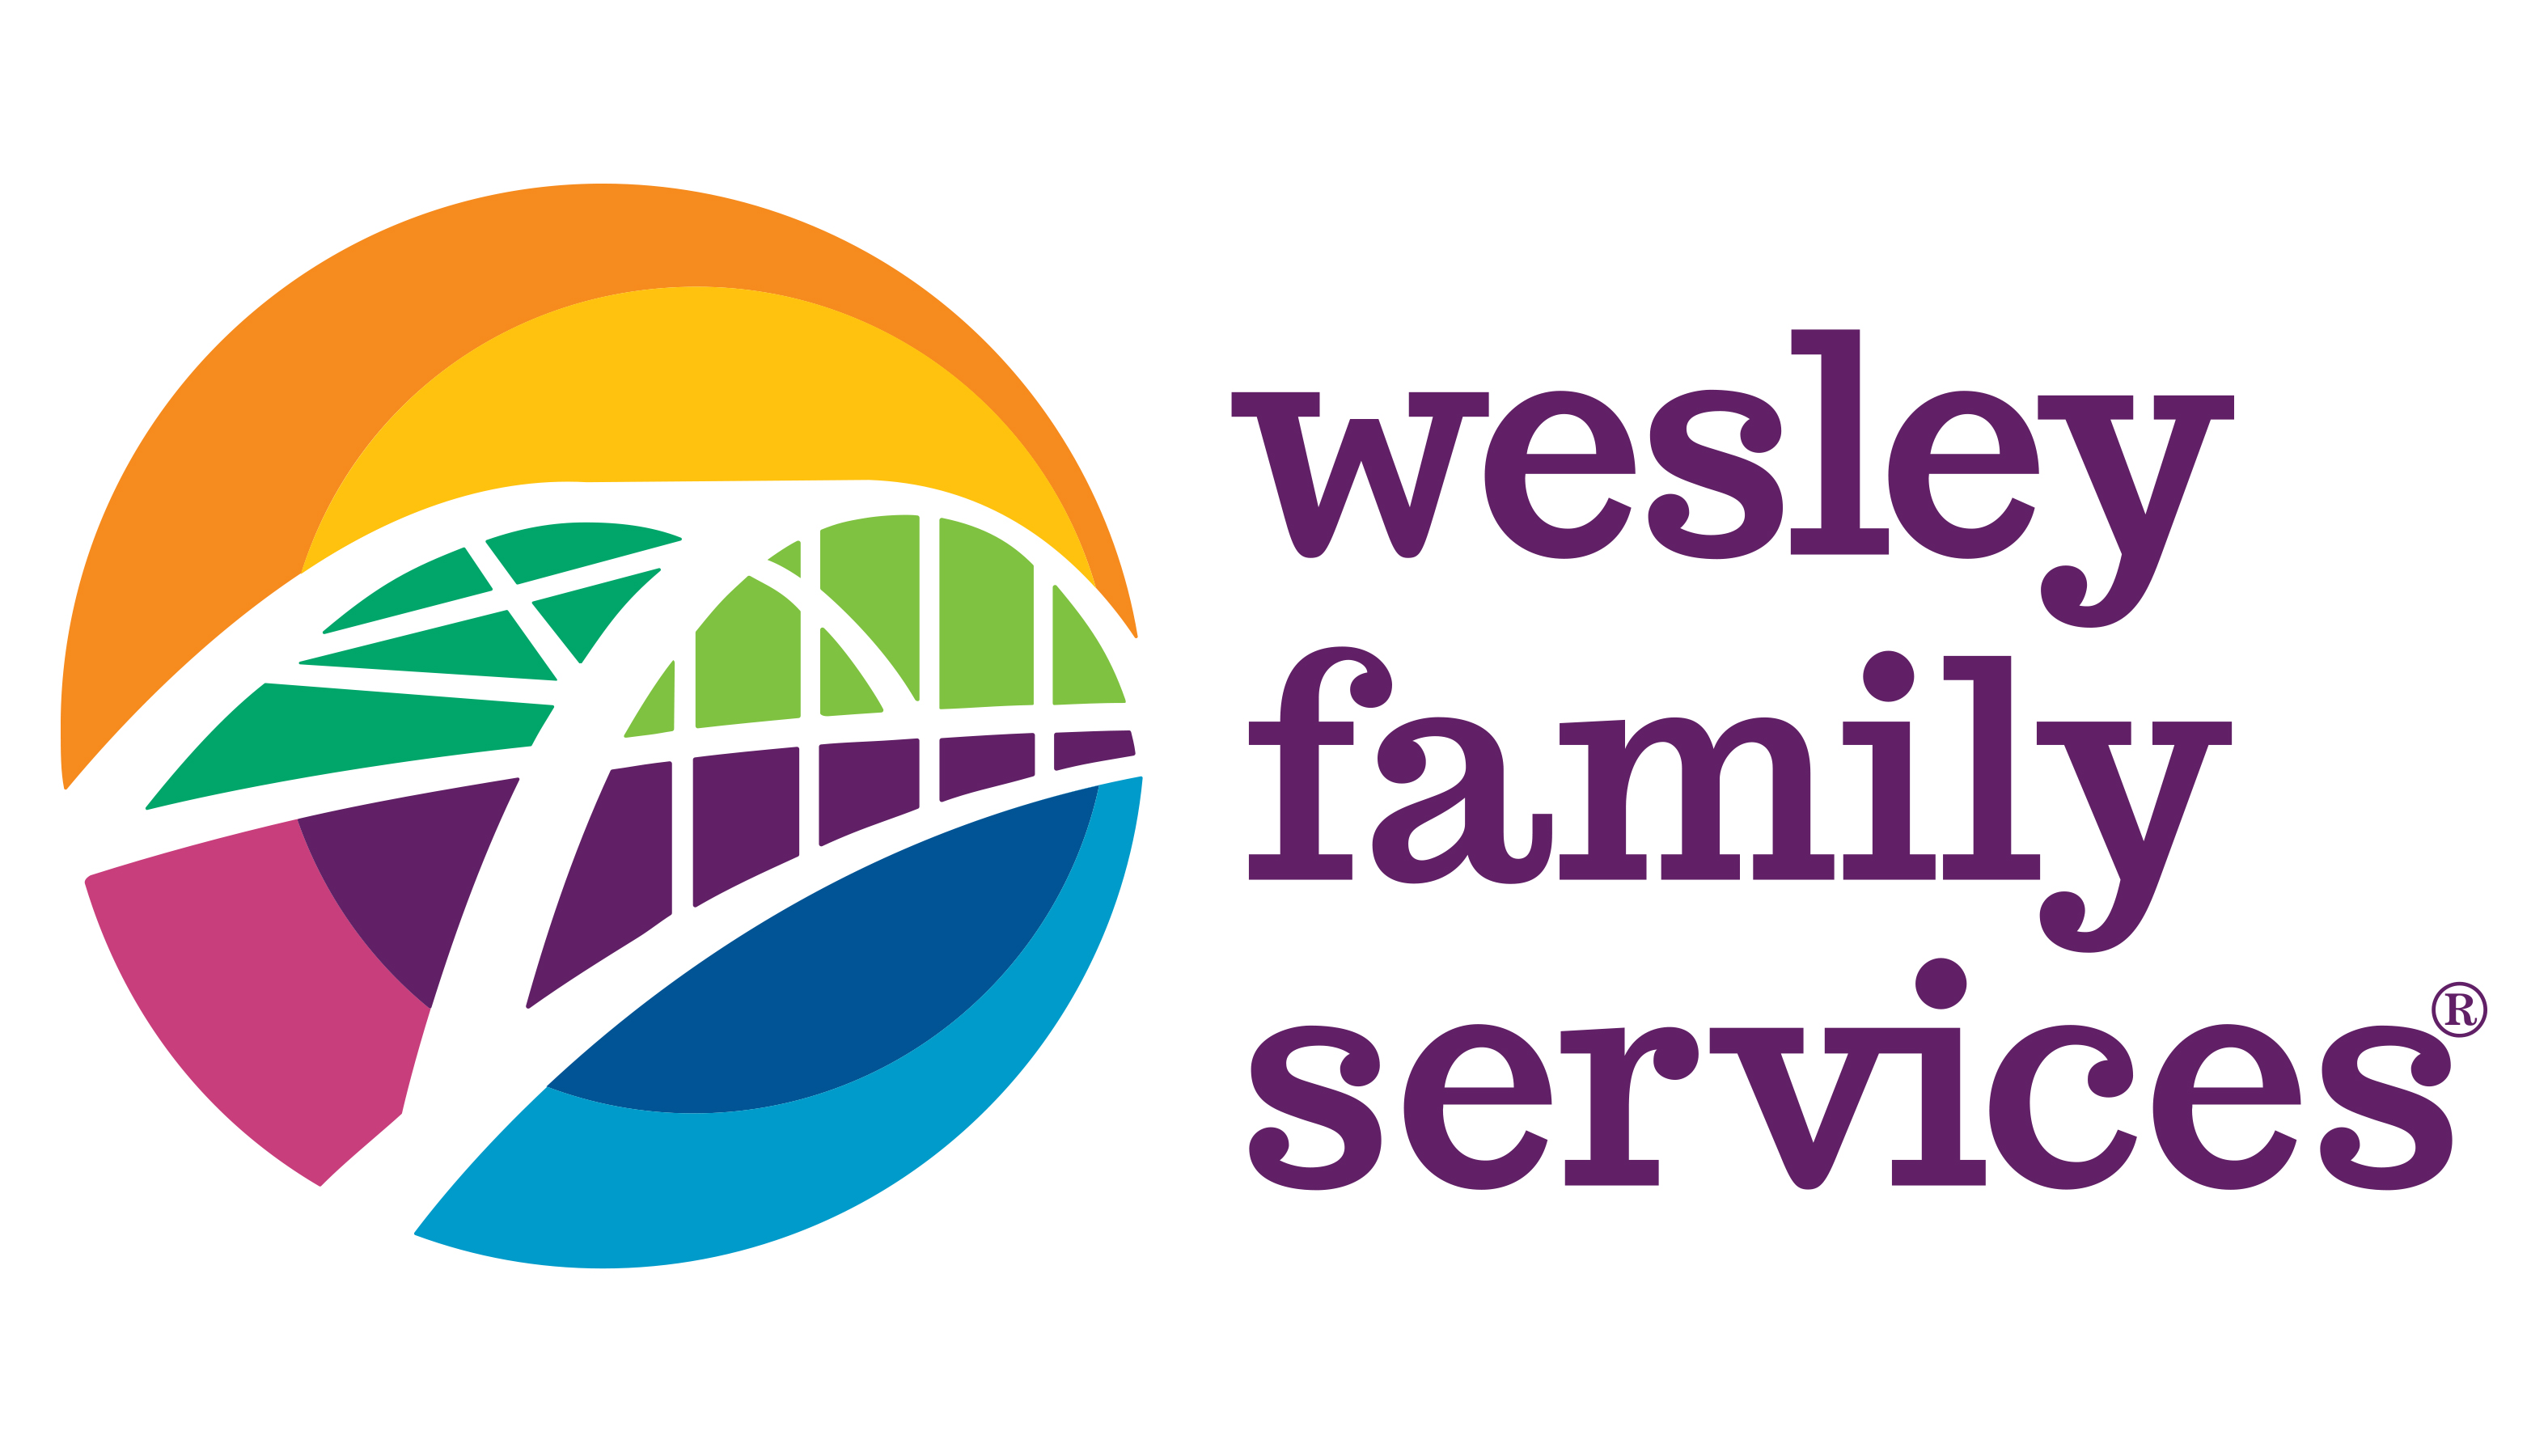 007 Wesley Family Services